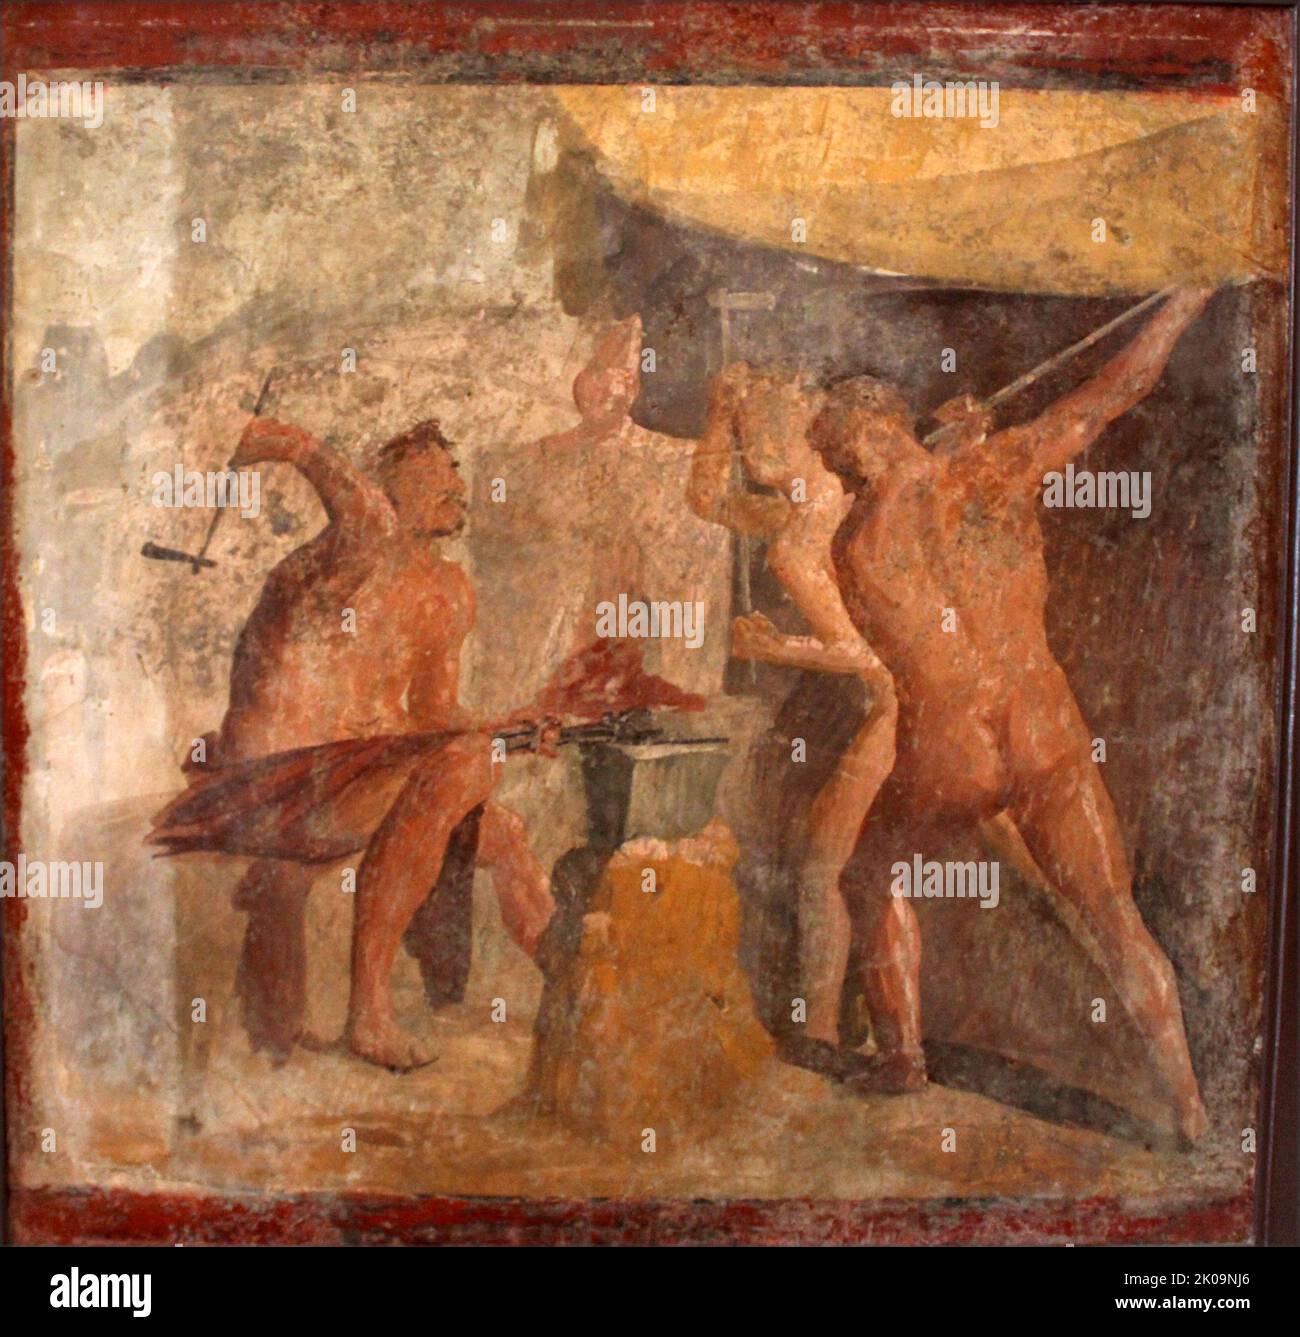 Forge of Hephaistos, Roman fresco. Hephaistos (Vulcan) at his forge, hammering metal on an anvil. He is assisted by a pair of Cyclops. Fresco from the Casa delle Quadrighe (House of the Chariots), in Pompeii, Italy. Roman, Ist century AD. Stock Photo